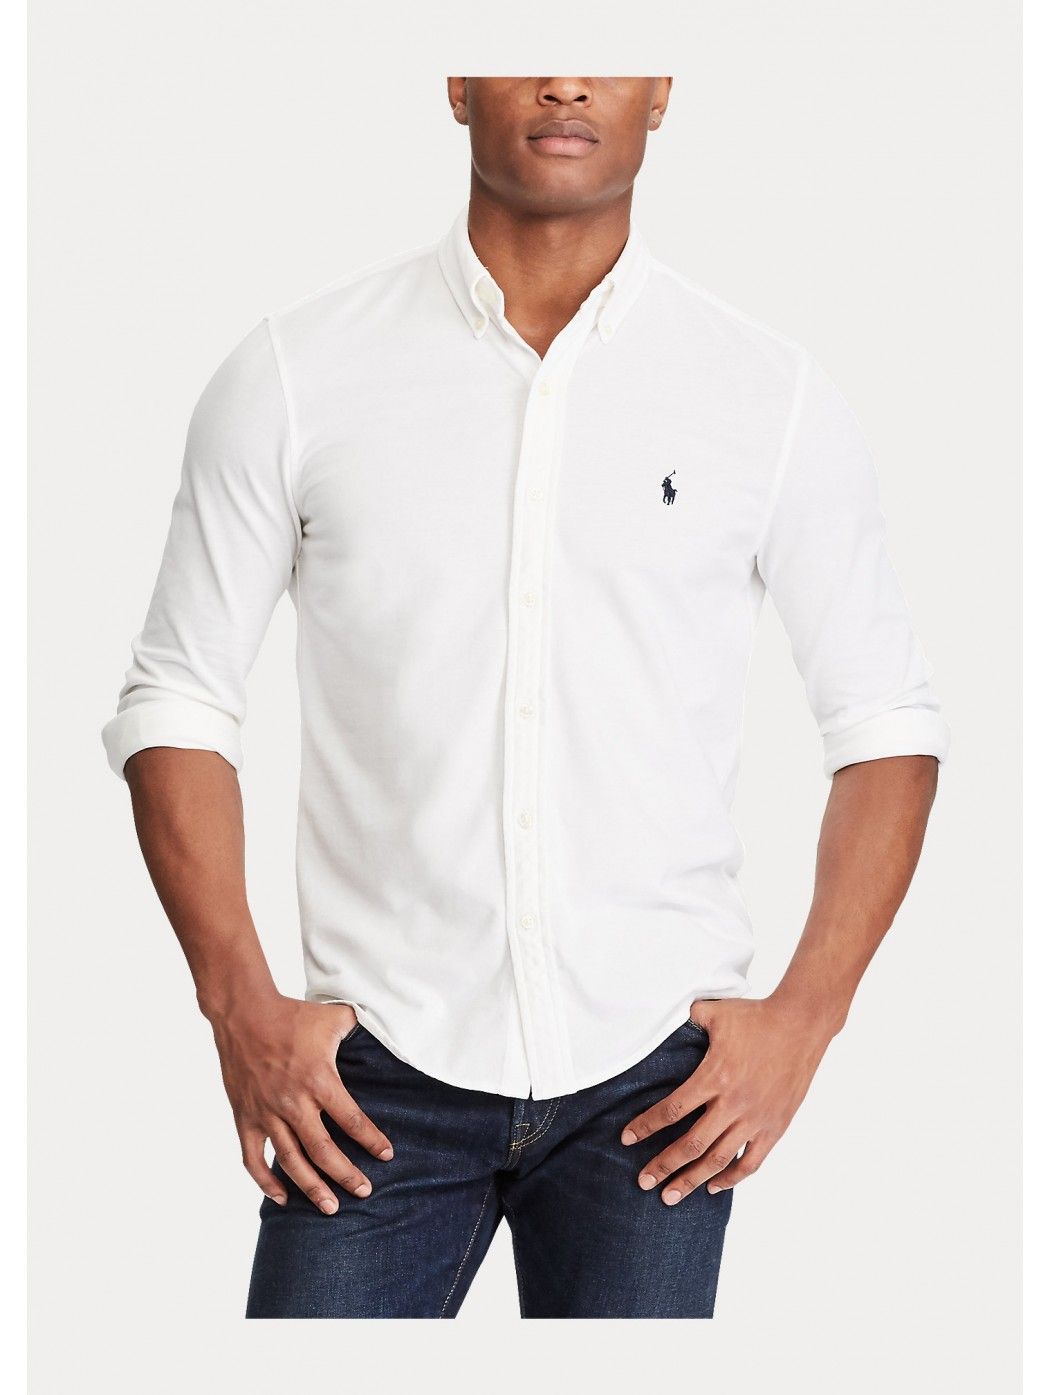 Made from our lightest cotton pique fabric, this version of our unique button-down shirt is perfect for mid-season or when you w